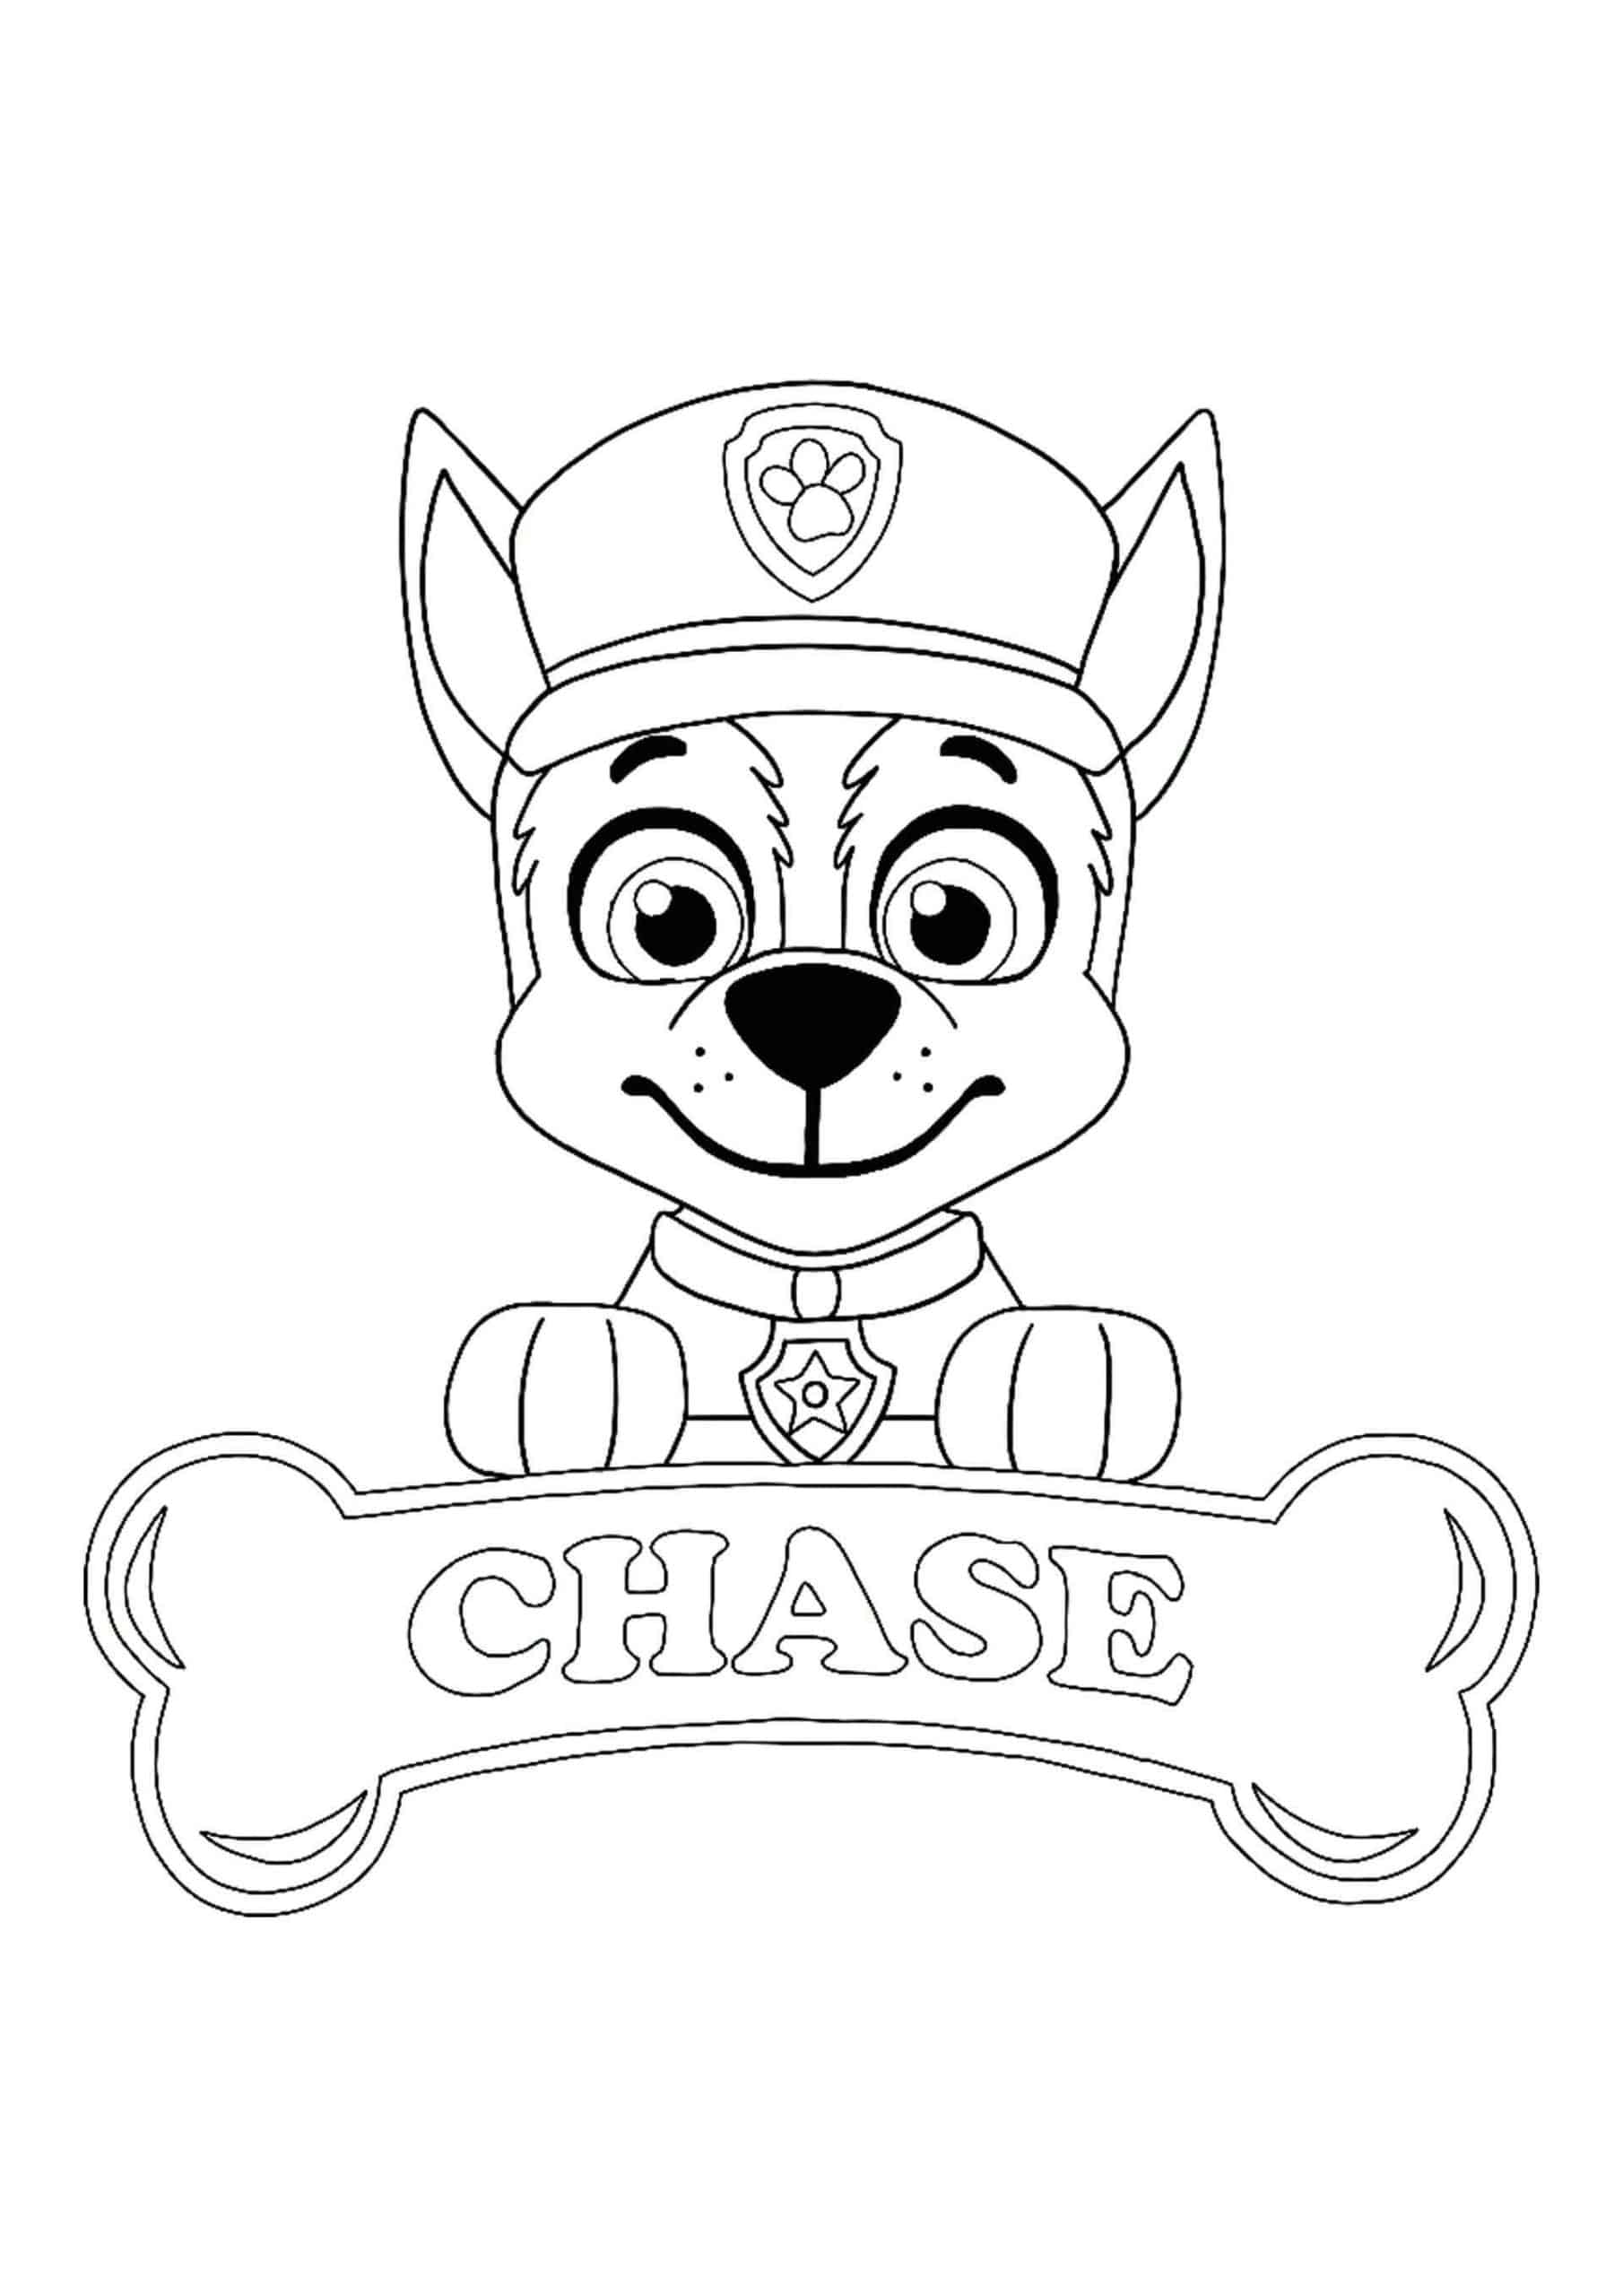 Paw Patrol Chase Coloring Pages - 4 Free Printable Coloring Sheets | 2020